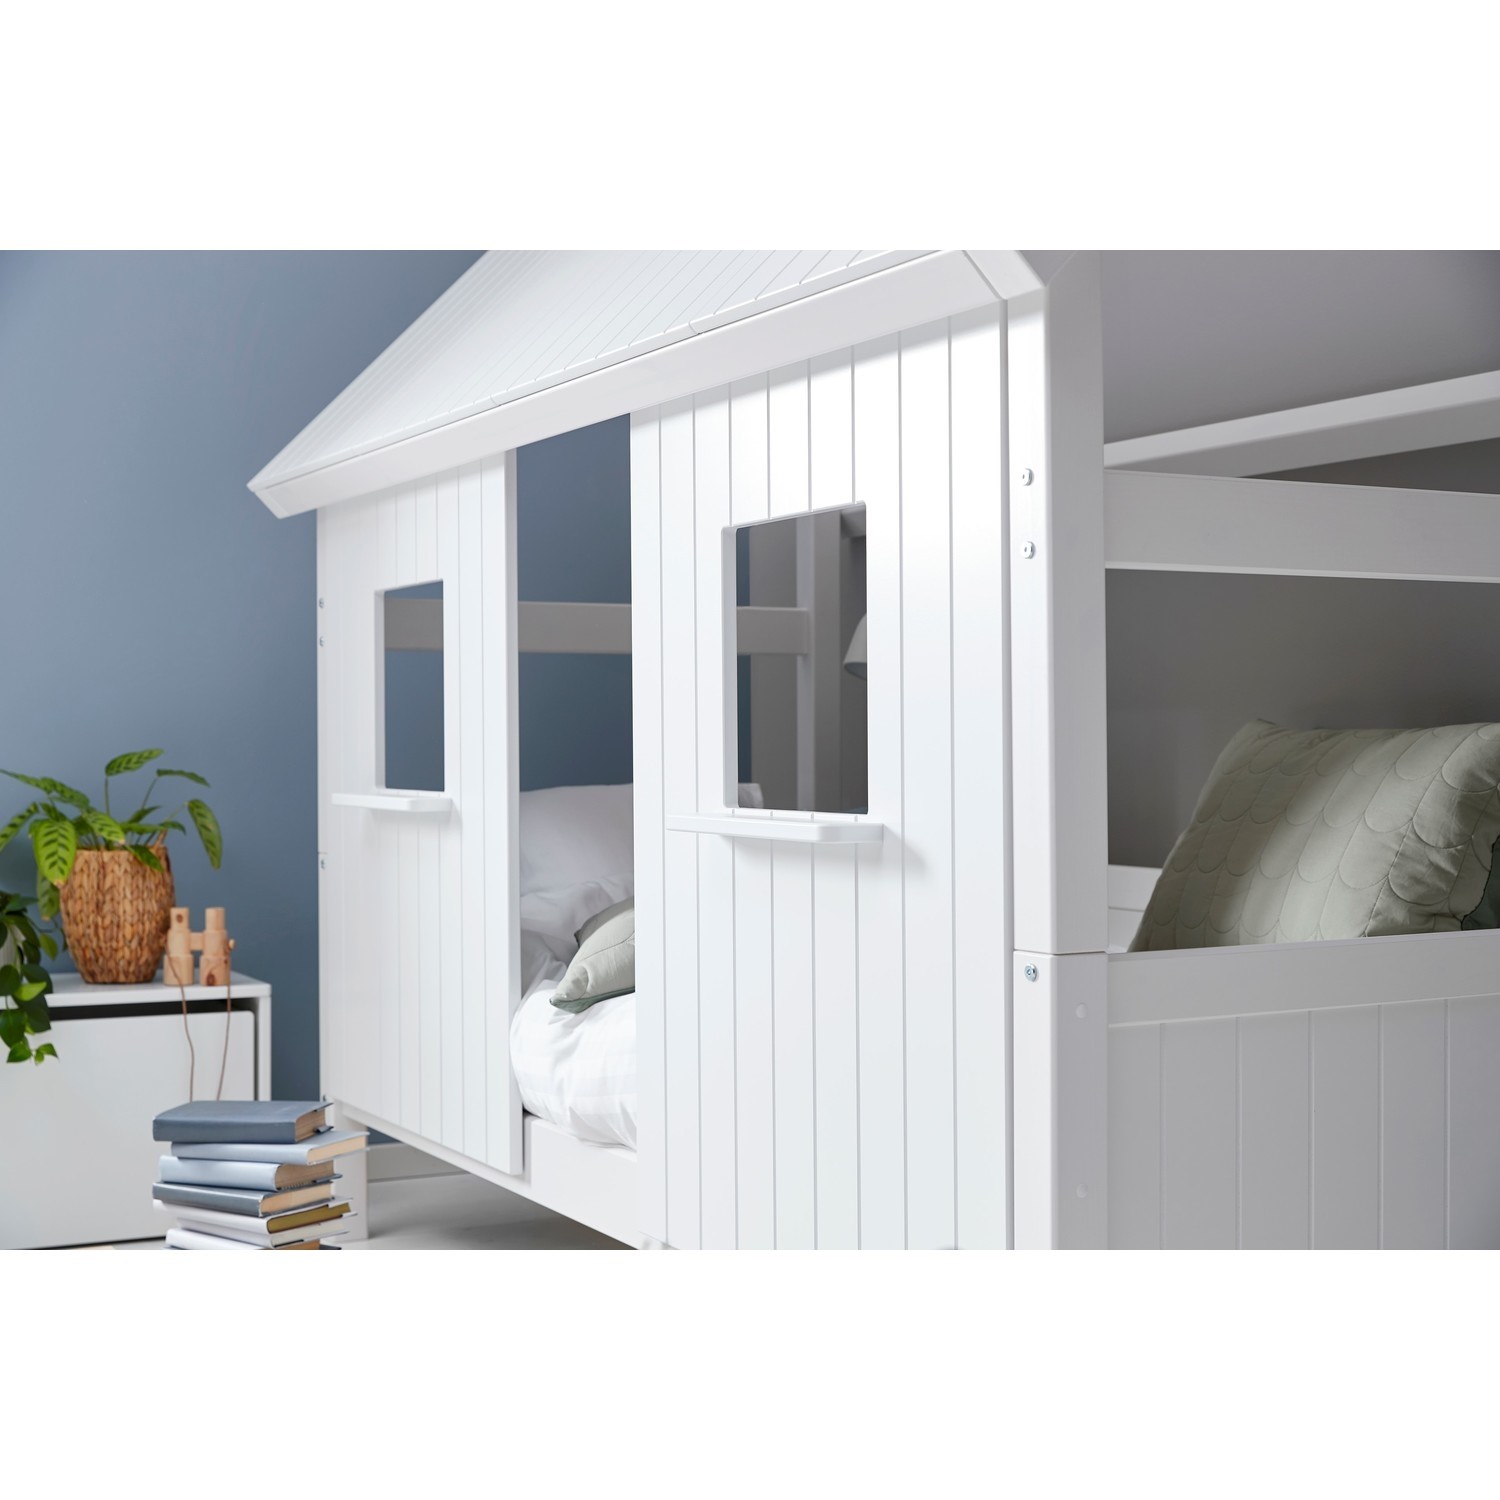 Read more about White wooden house cabin bed nordic kids avenue